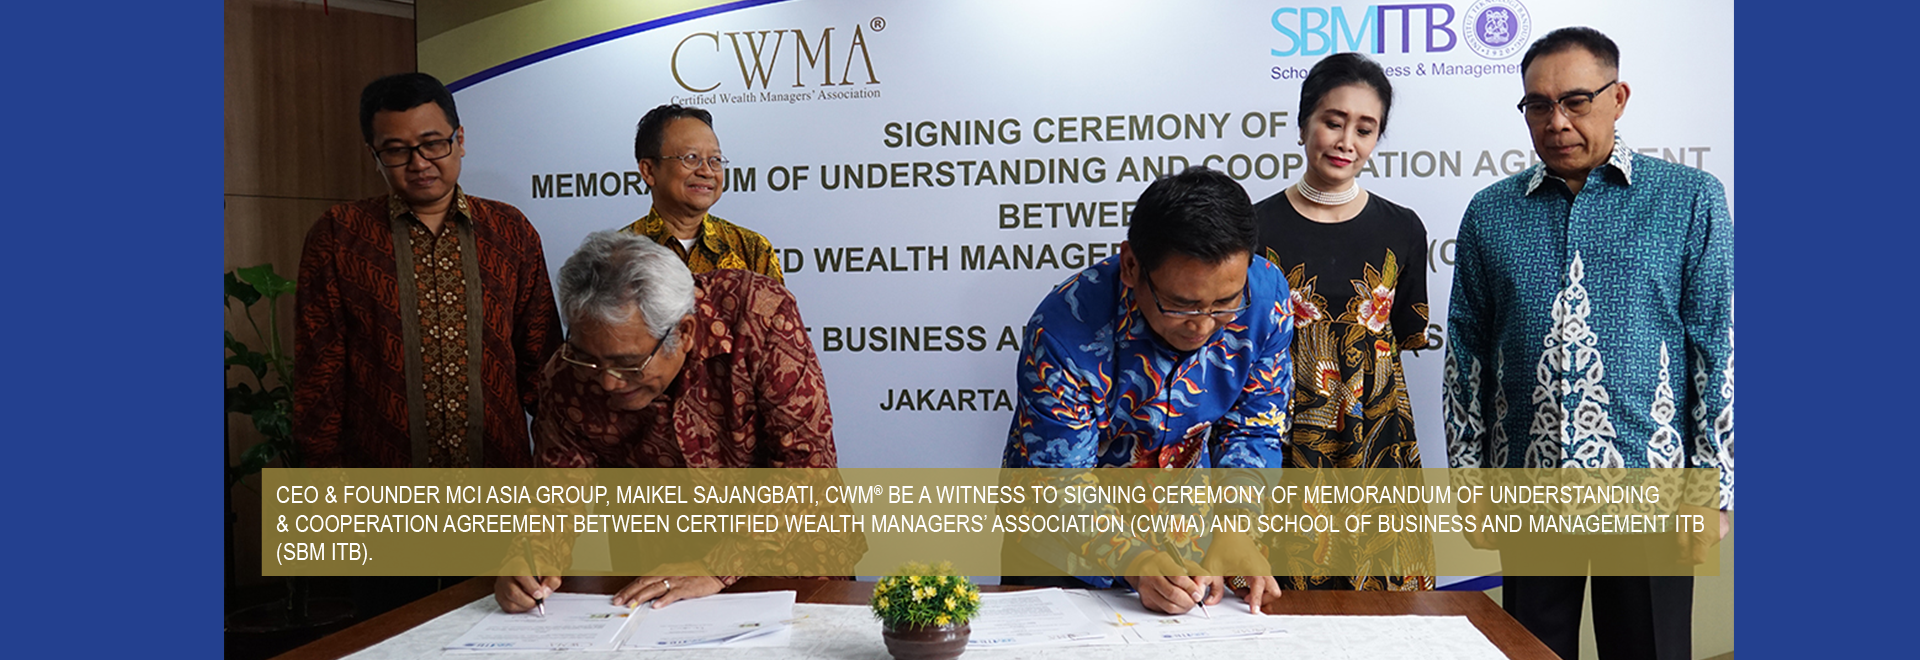 MoU & Cooperation Agreement CWMA-SBMITB